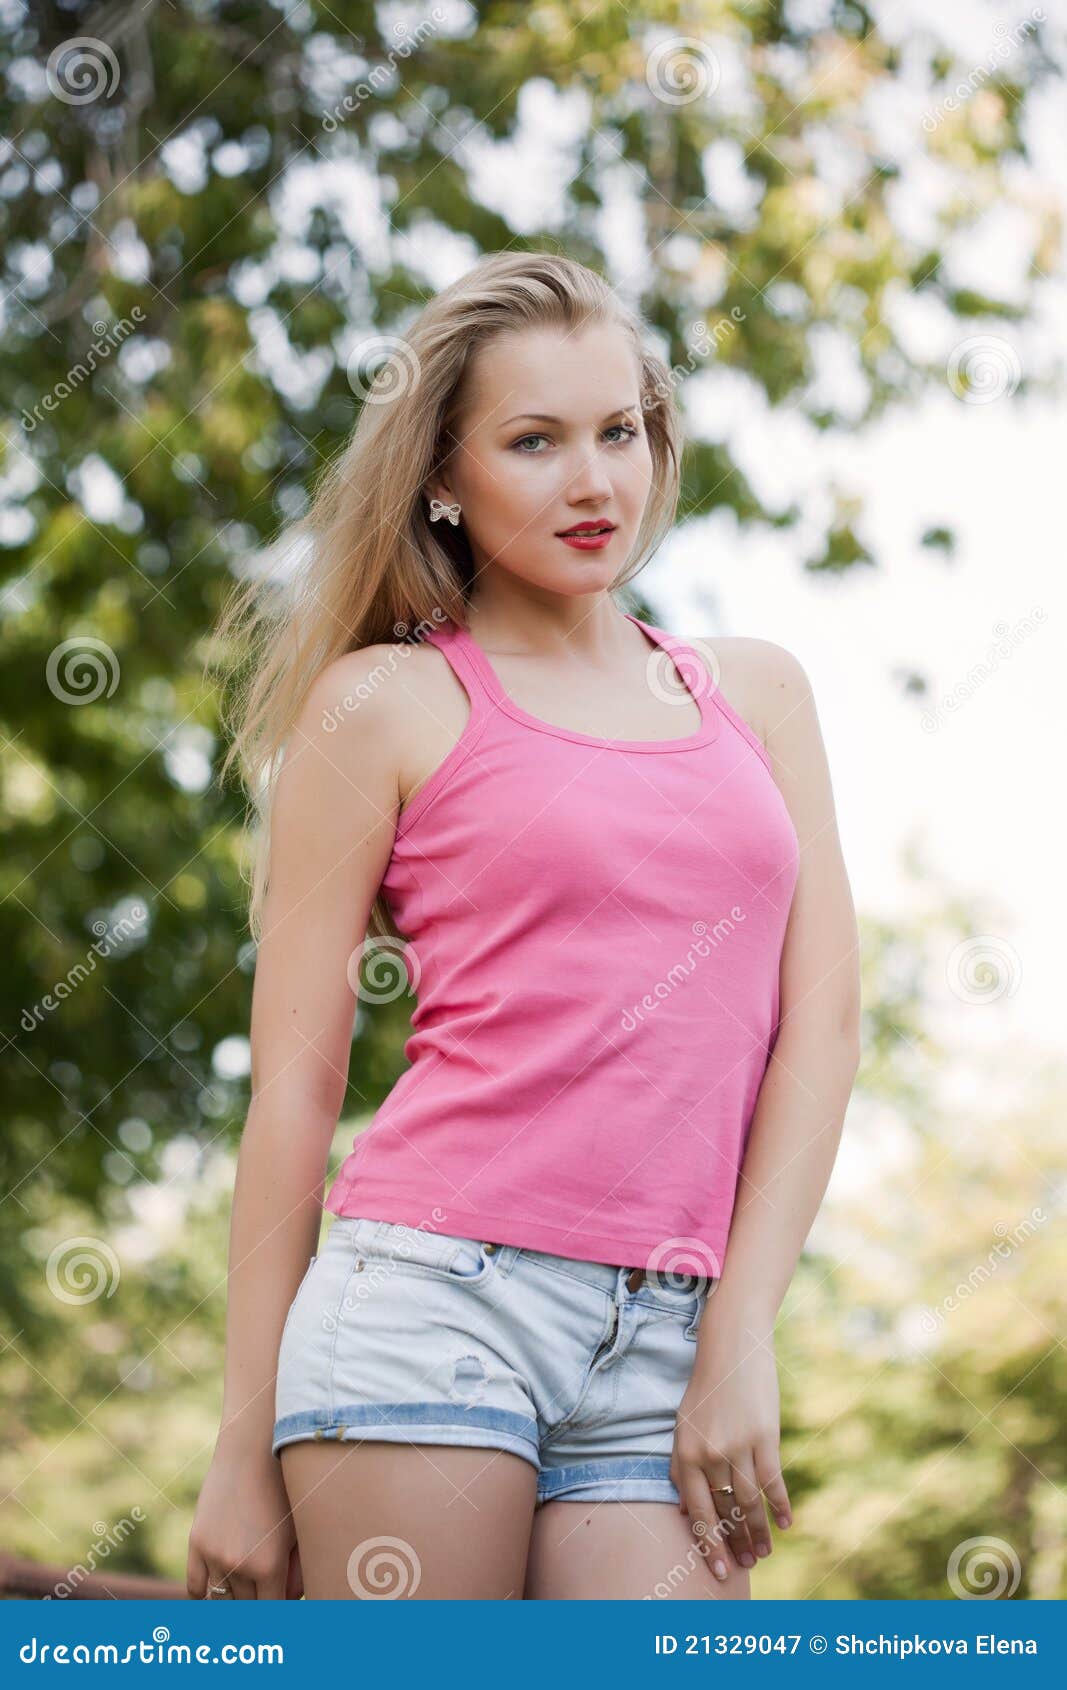 Beautiful Girl with Long Hair Stock Image - Image of walk, vest: 21329047